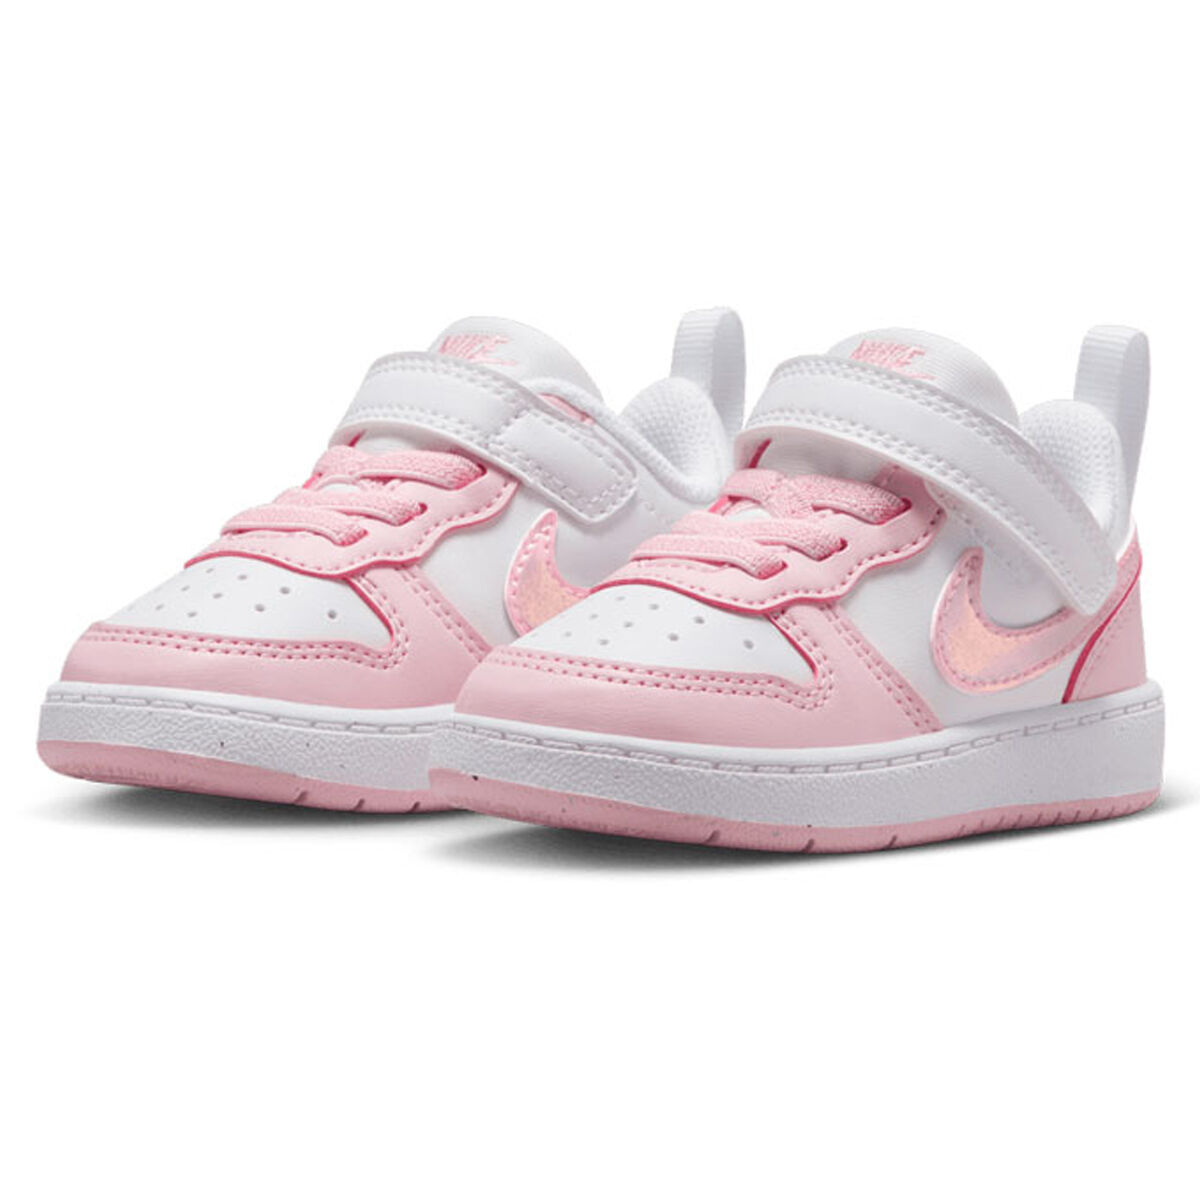 Nike Court Borough Low Recraft Toddlers Shoes